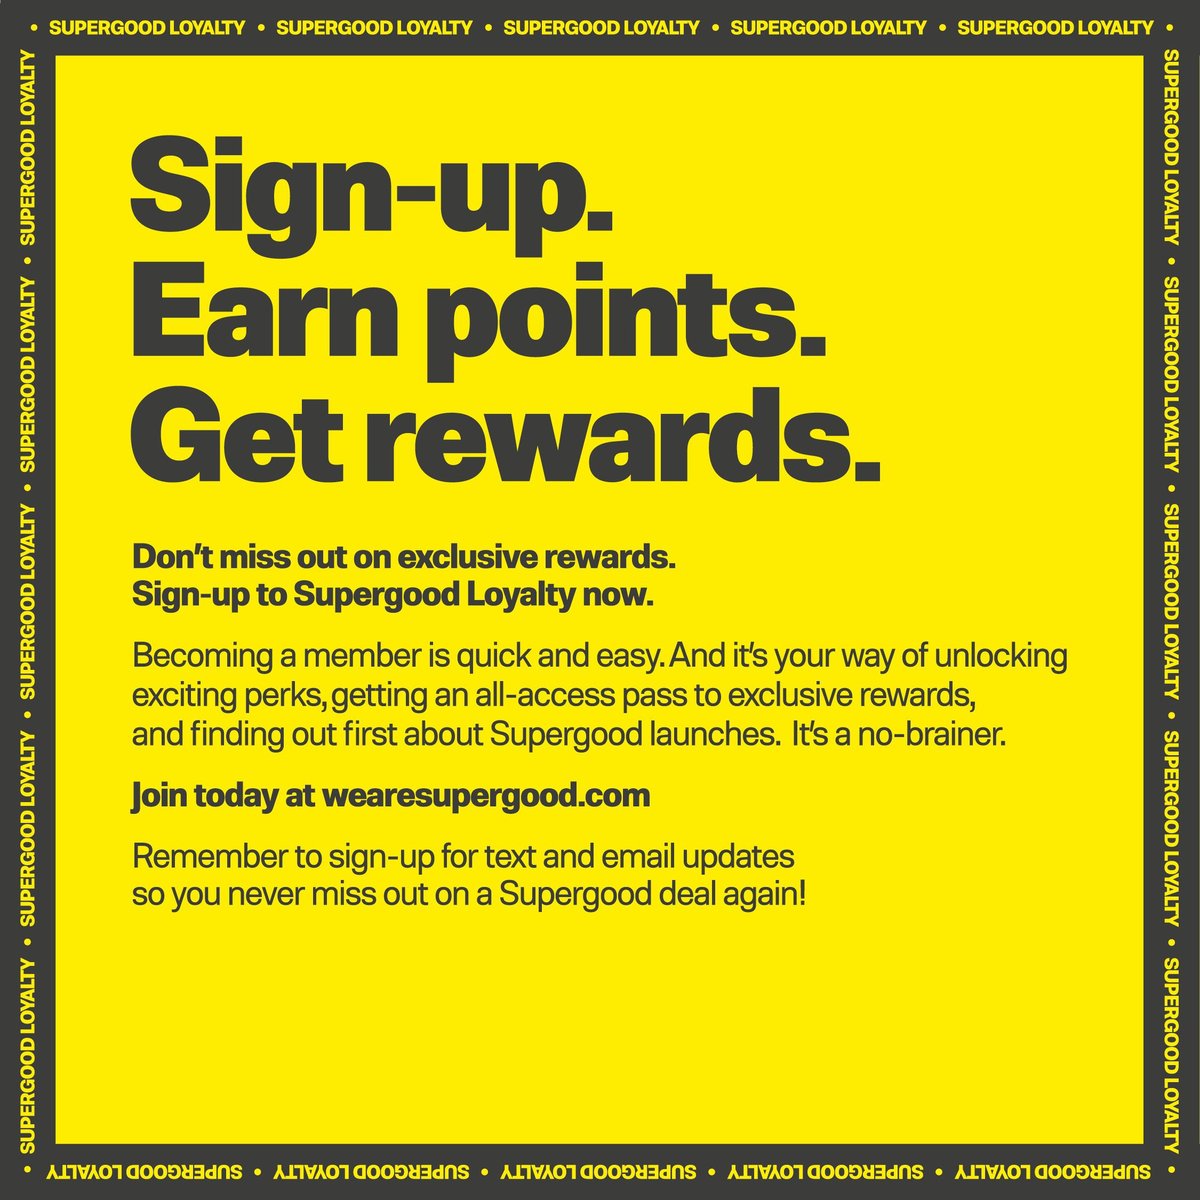 Sign up to Supergood Loyalty and save £££!